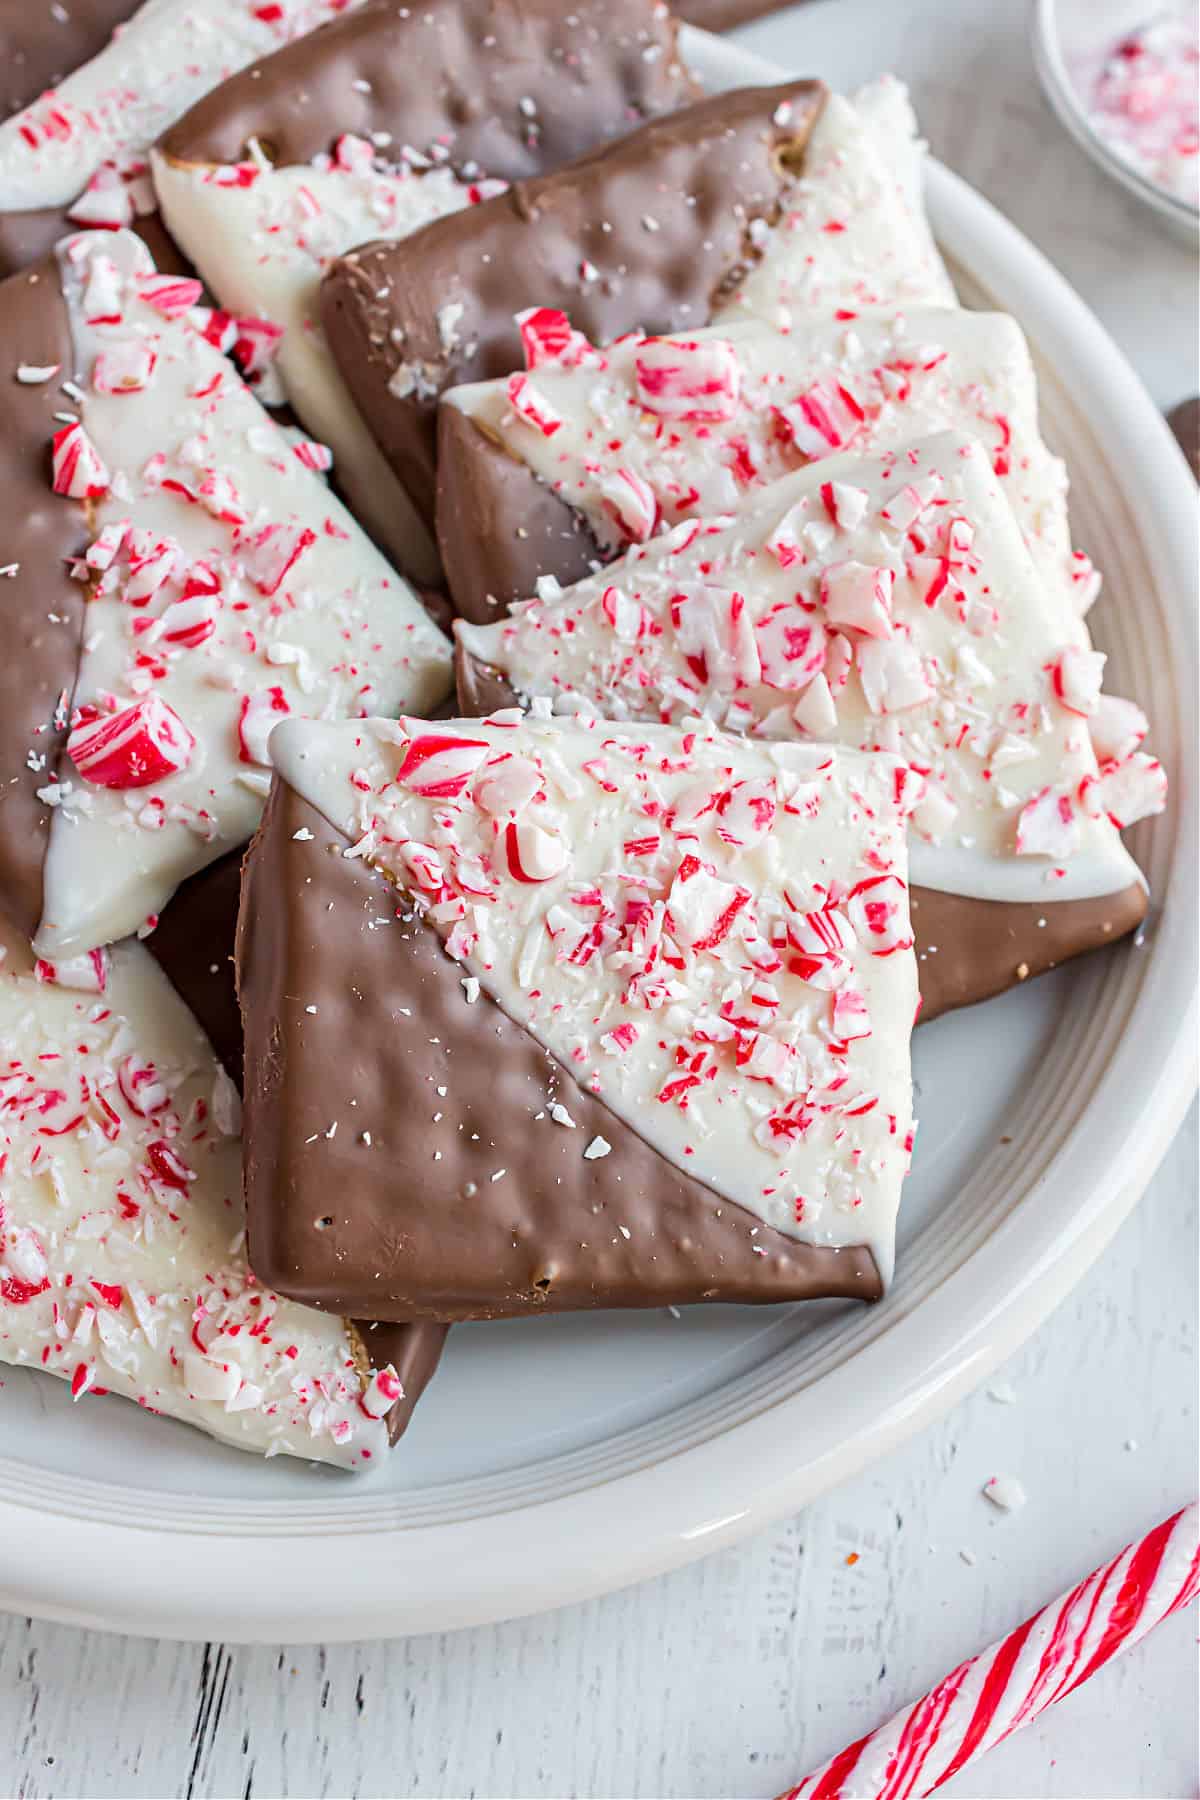 Graham crackers dipped in milk and white chocolate with peppermints.